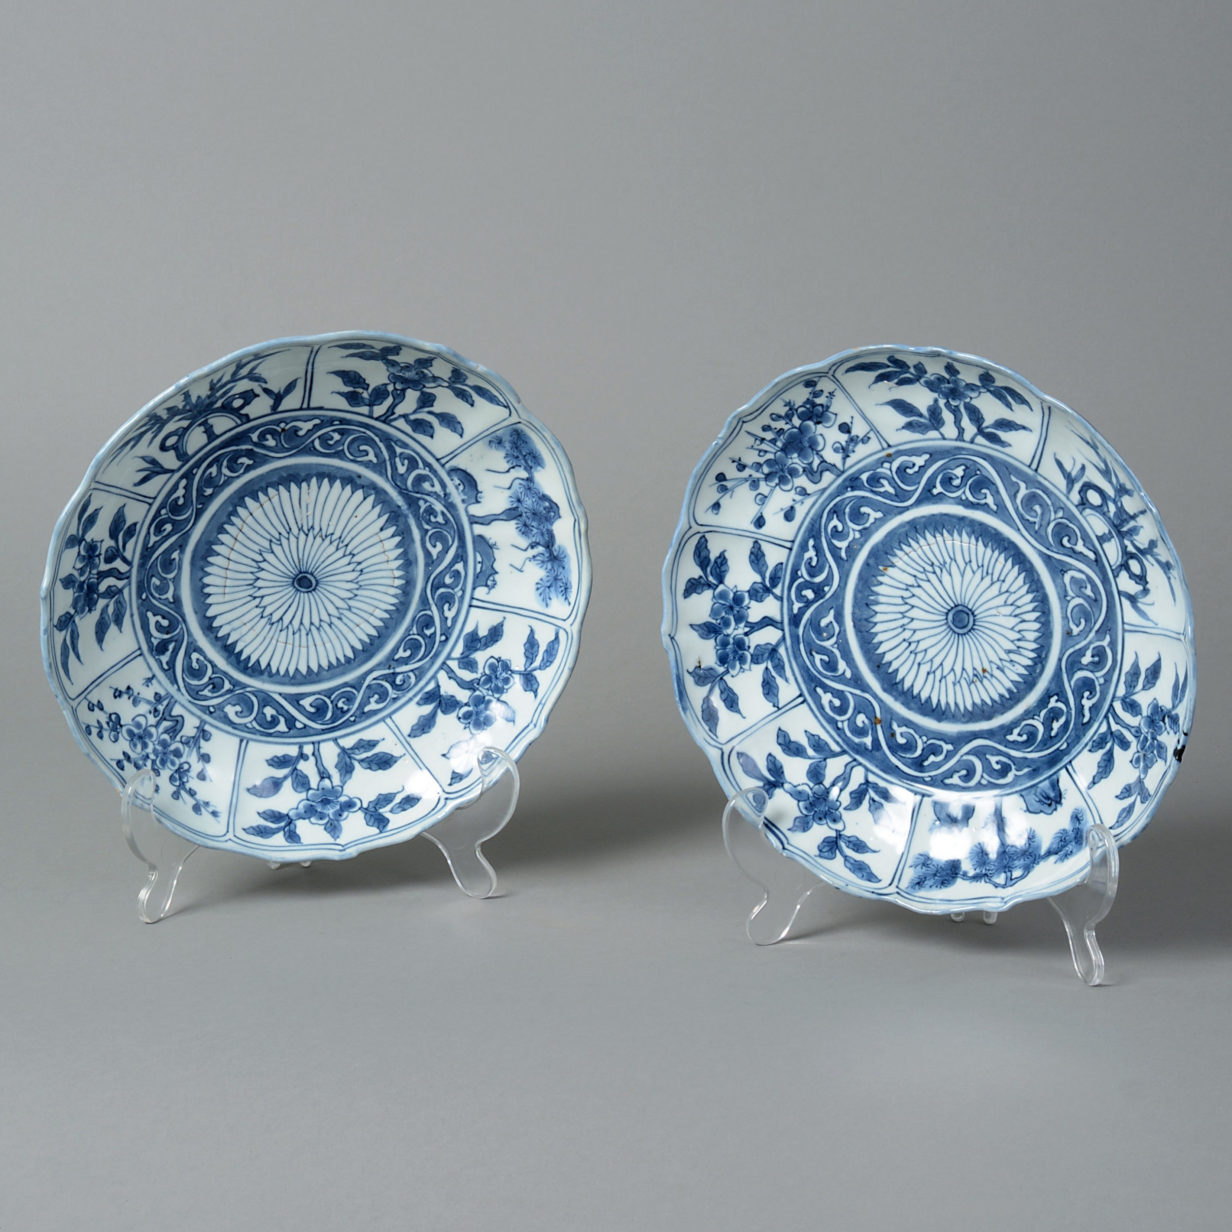 A pair of late ming dynasty blue and white plates